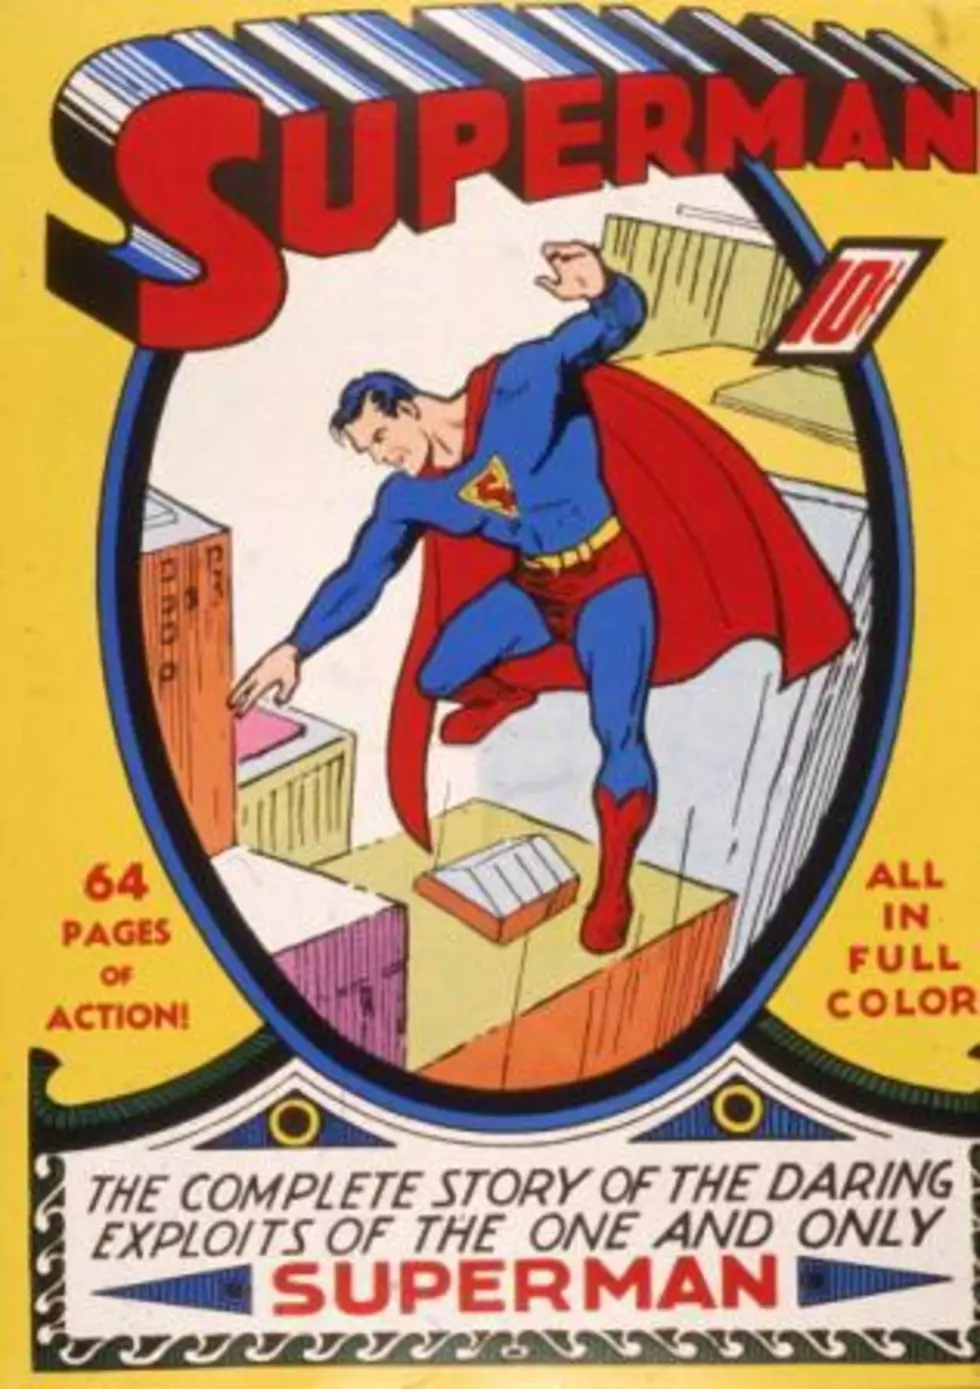 Superman Comic Book Sells For Over Two Million Dollars [VIDEO]